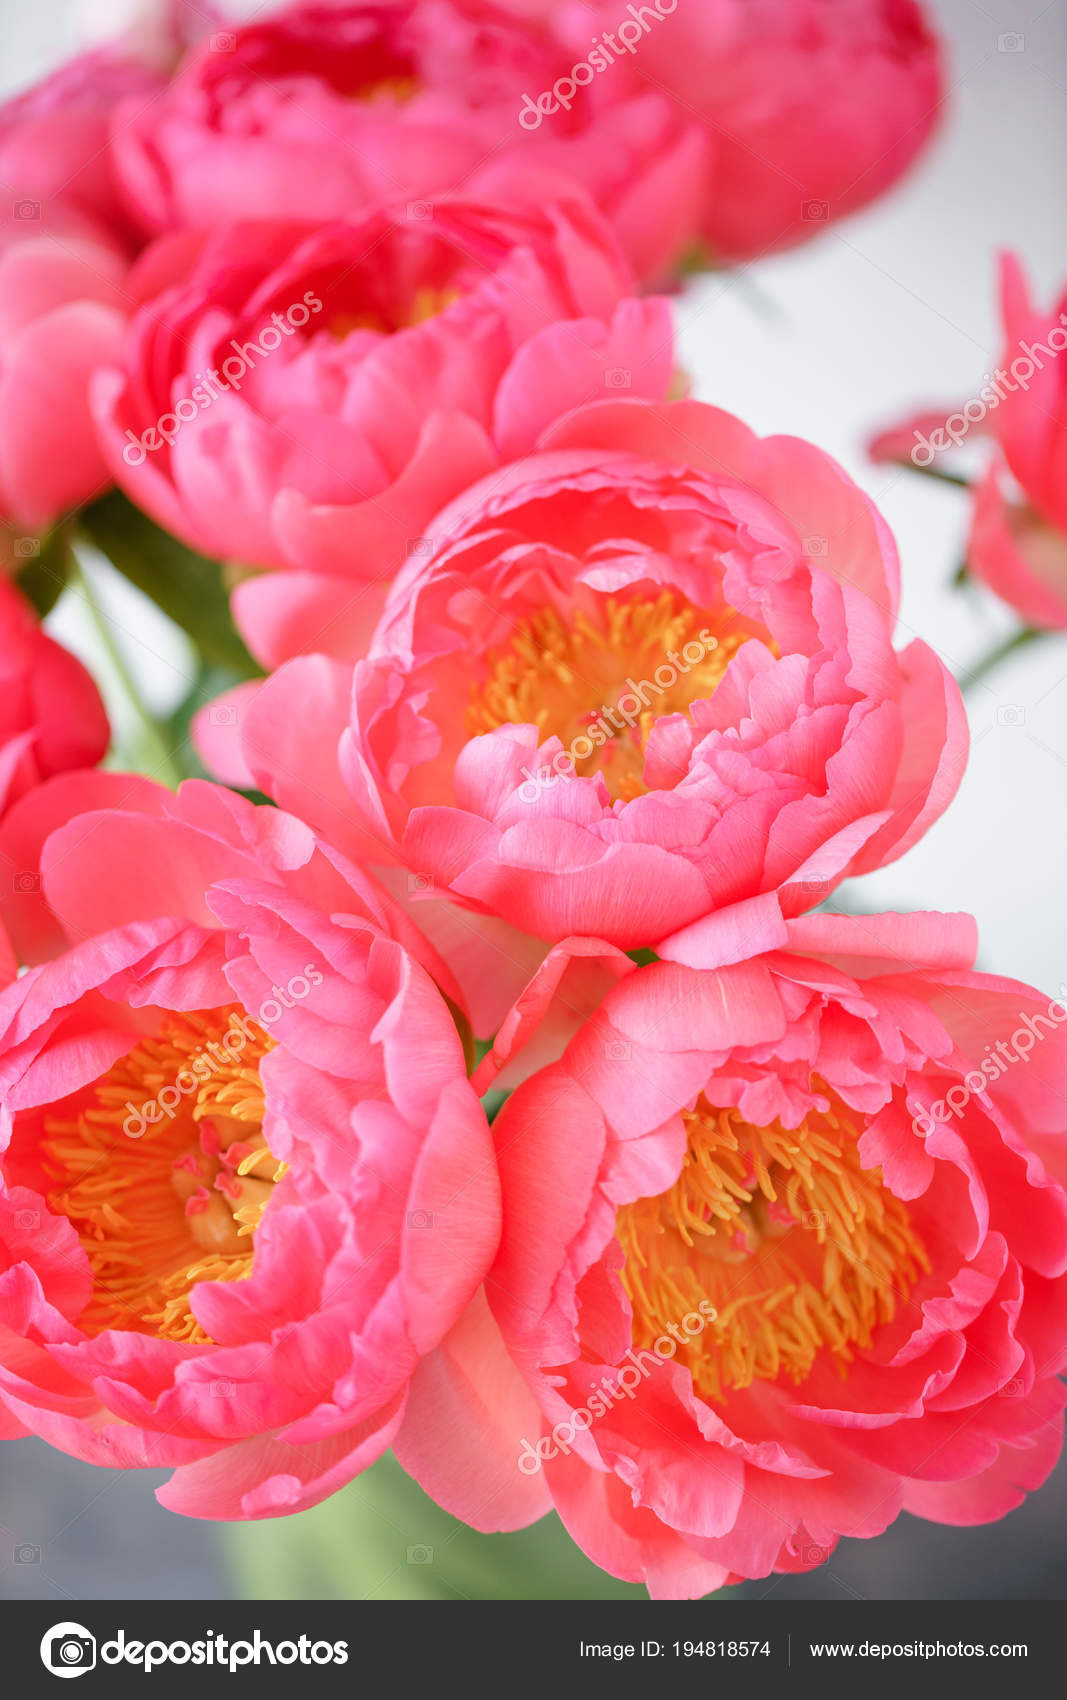 Lovely Flowers In Glass Vase Beautiful Bouquet Of Peonies - High Def Coral Charm Peonies - HD Wallpaper 